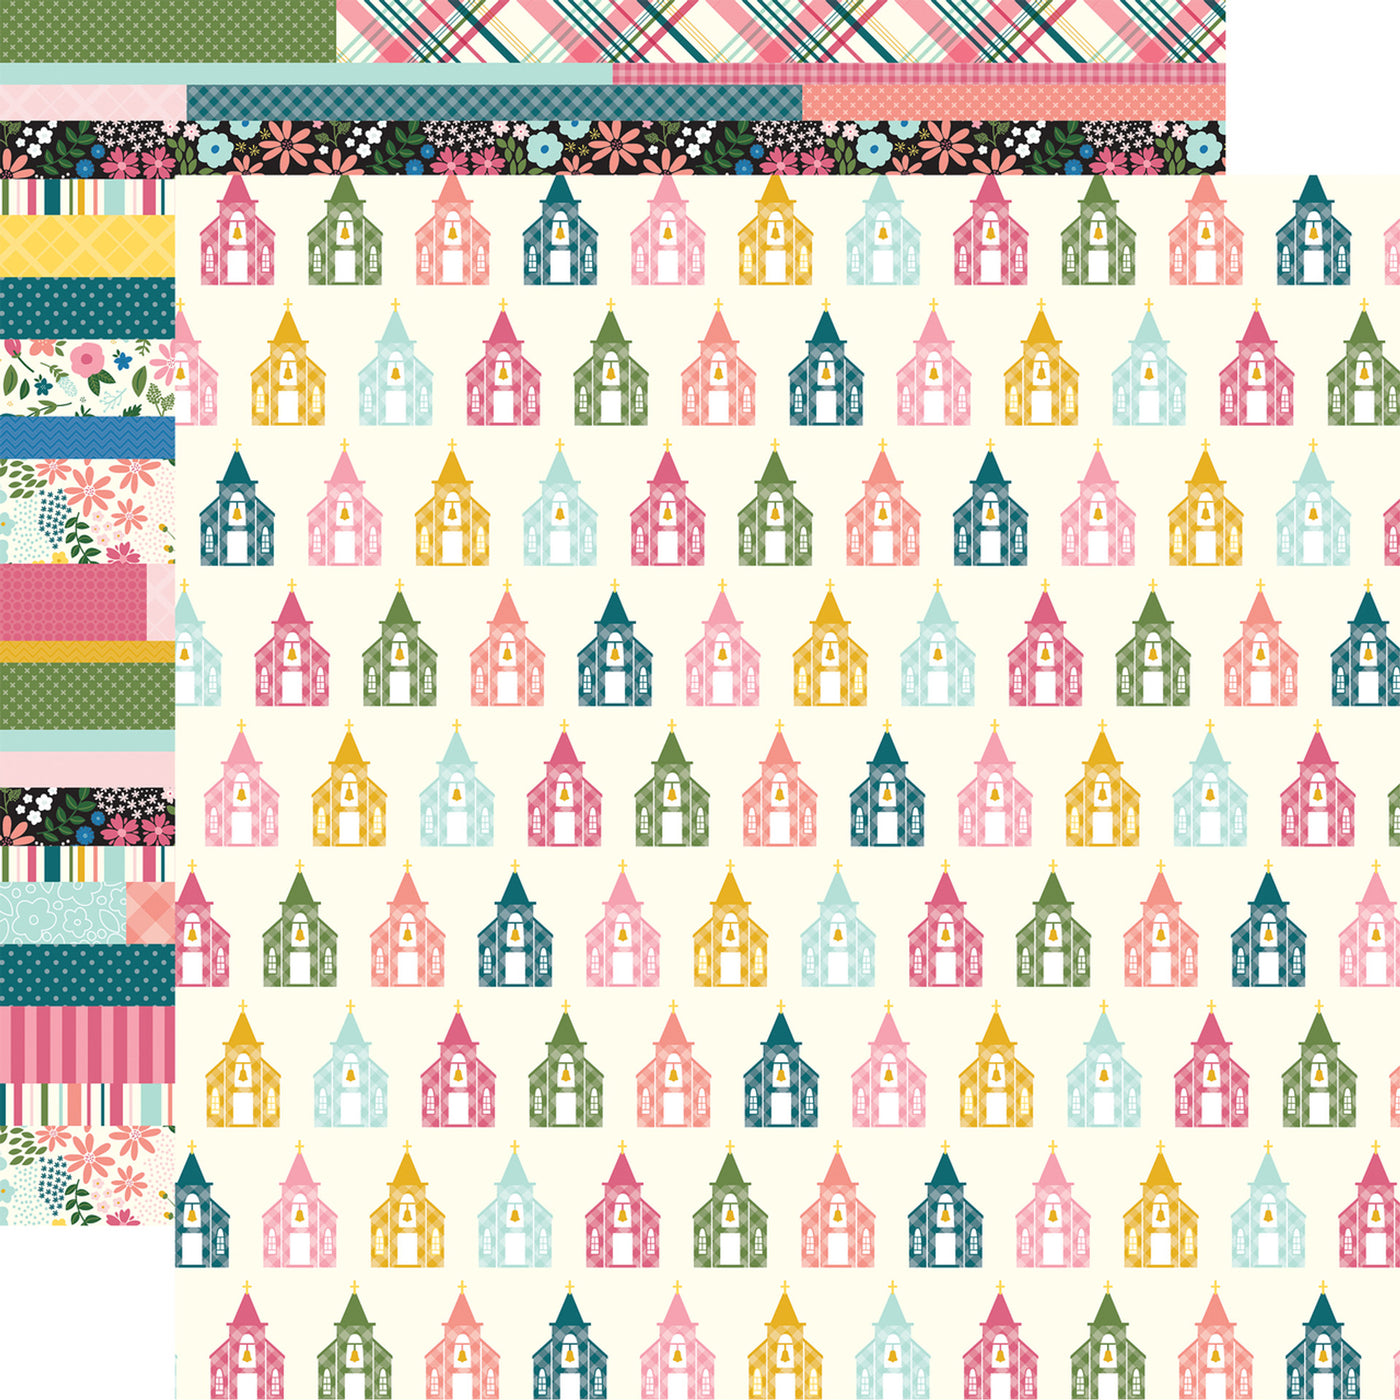 (Side A - rows of different patterns in pink, olive green, baby blue, and yellow; Side B - repeating little chapels in different matching colors on a cream background)- from Echo Park Paper.